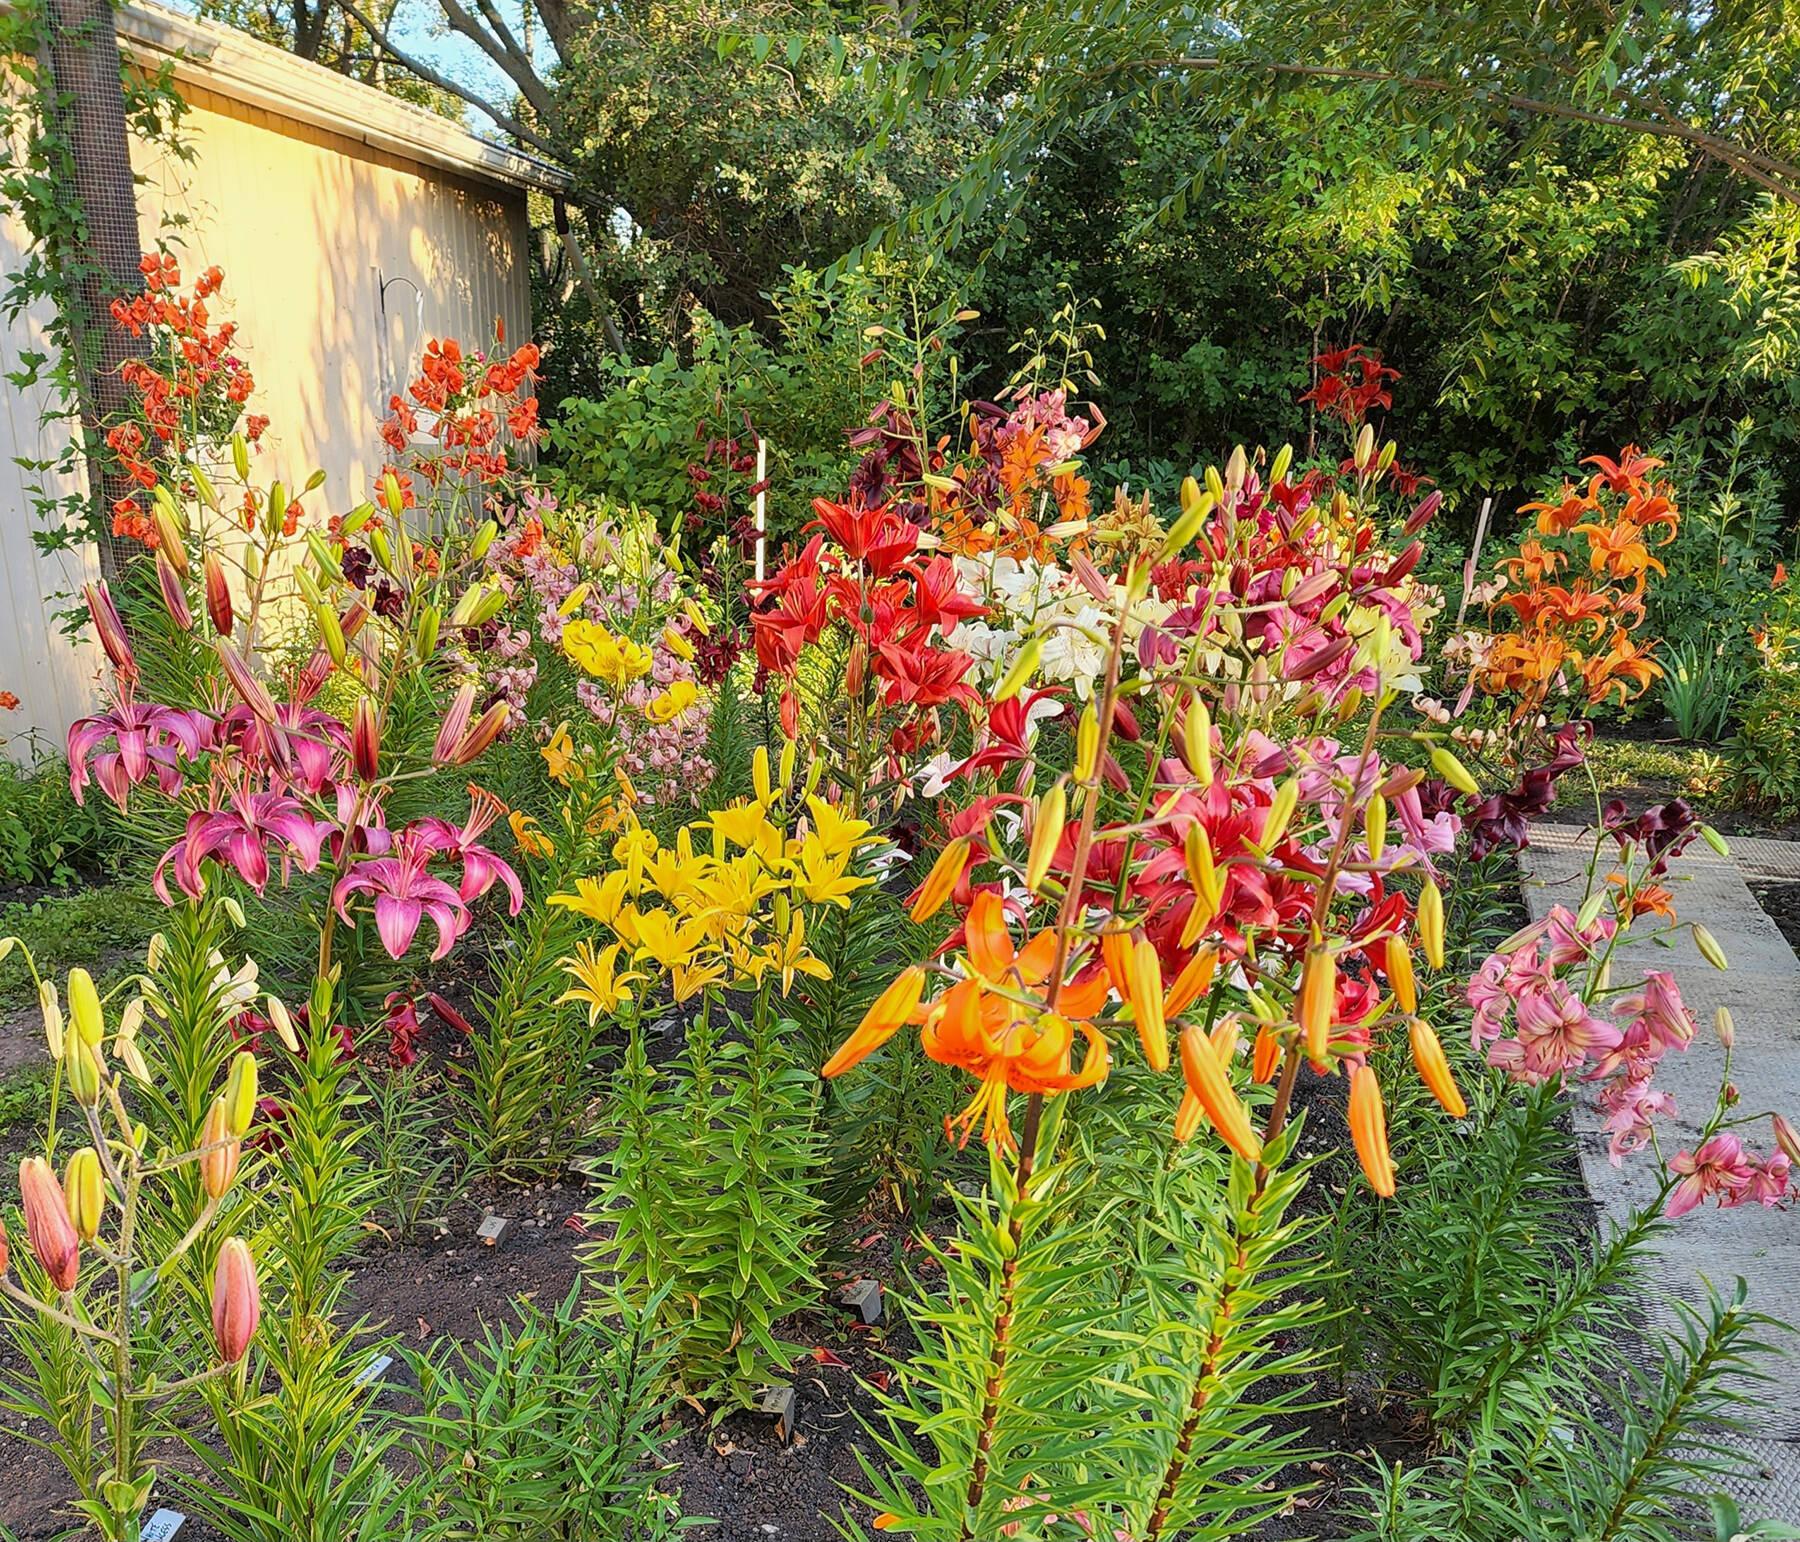  <p>Leanne Dowd&rsquo;s Neepawa garden features lilies planted en masse. Let&rsquo;s fall in love again &#010;with lilies.</p> 